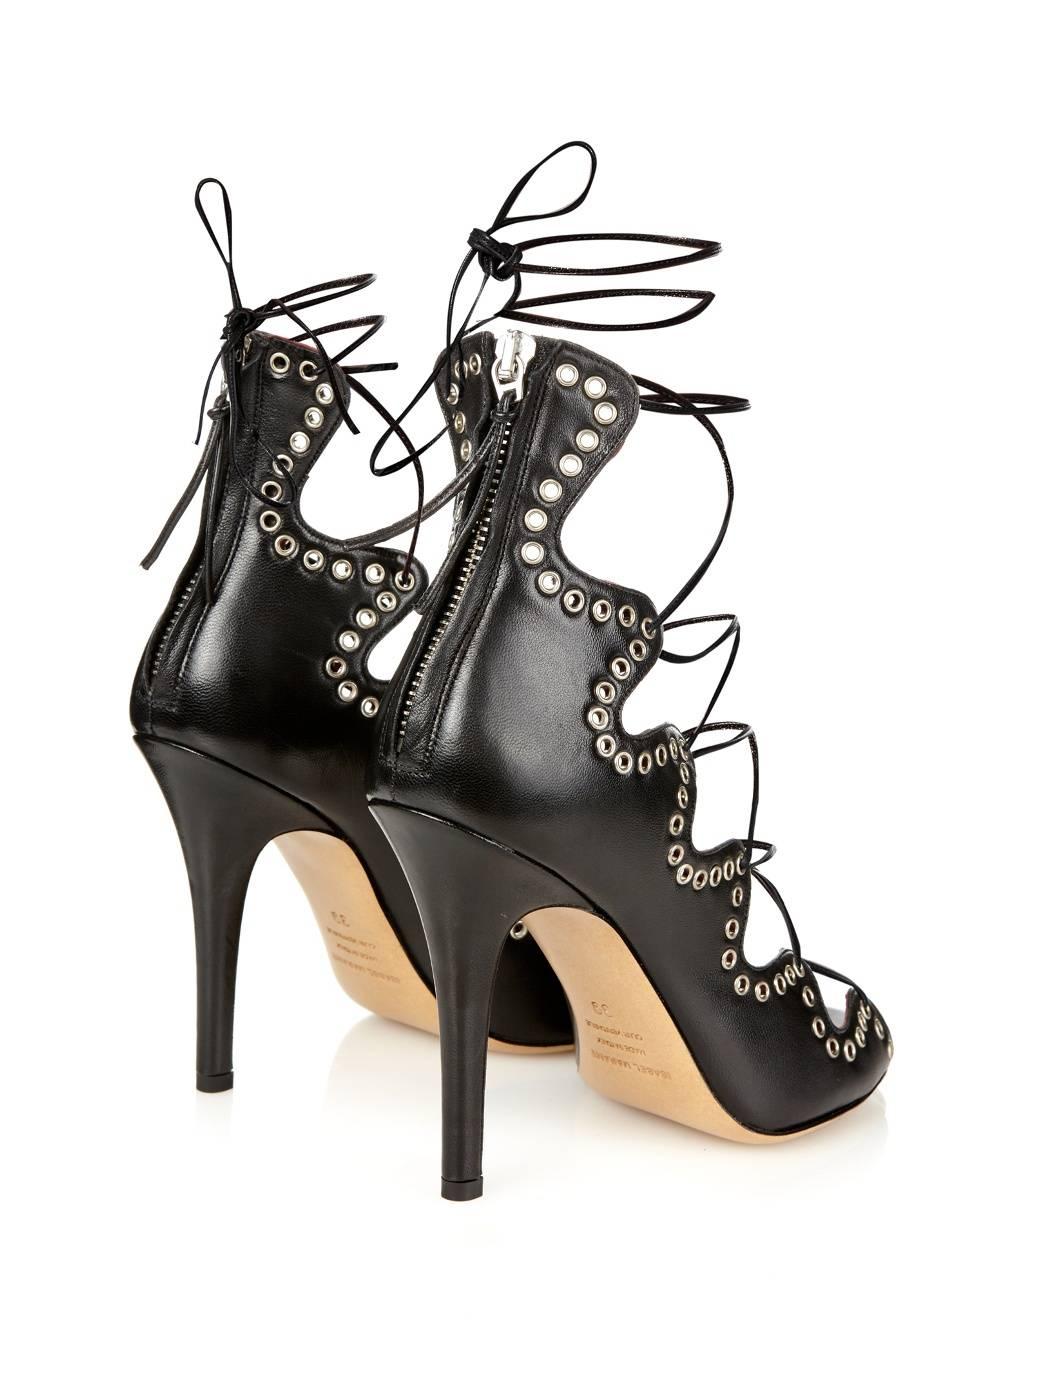 Isabel Marant NEW & SOLD OUT Black Lace Up Cut Out Heels Sandals in Box 1